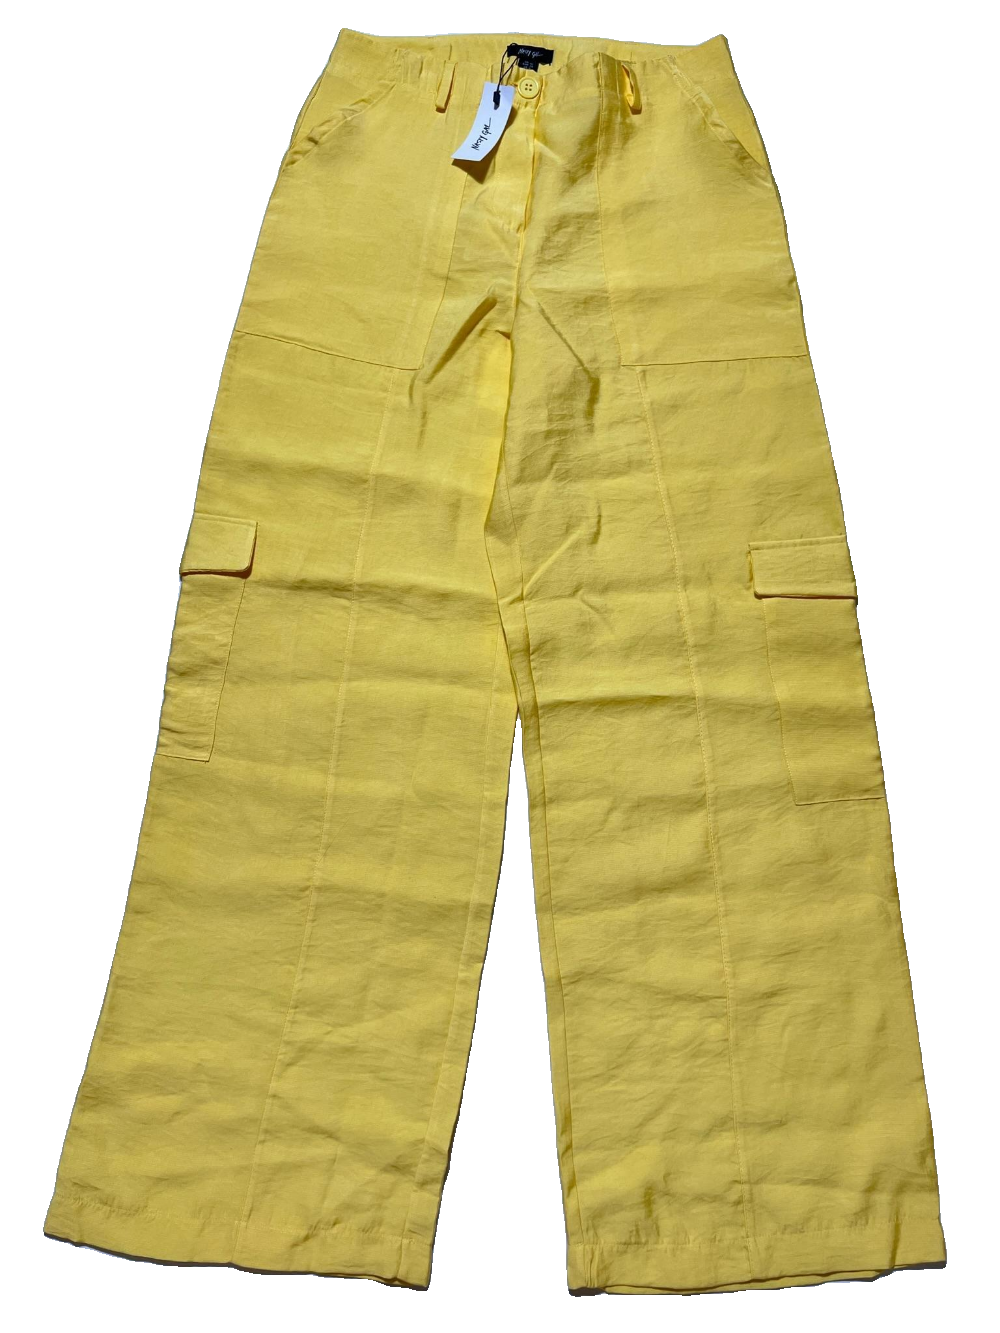 Nasty Gal - Yellow Pants NEW WITH TAGS